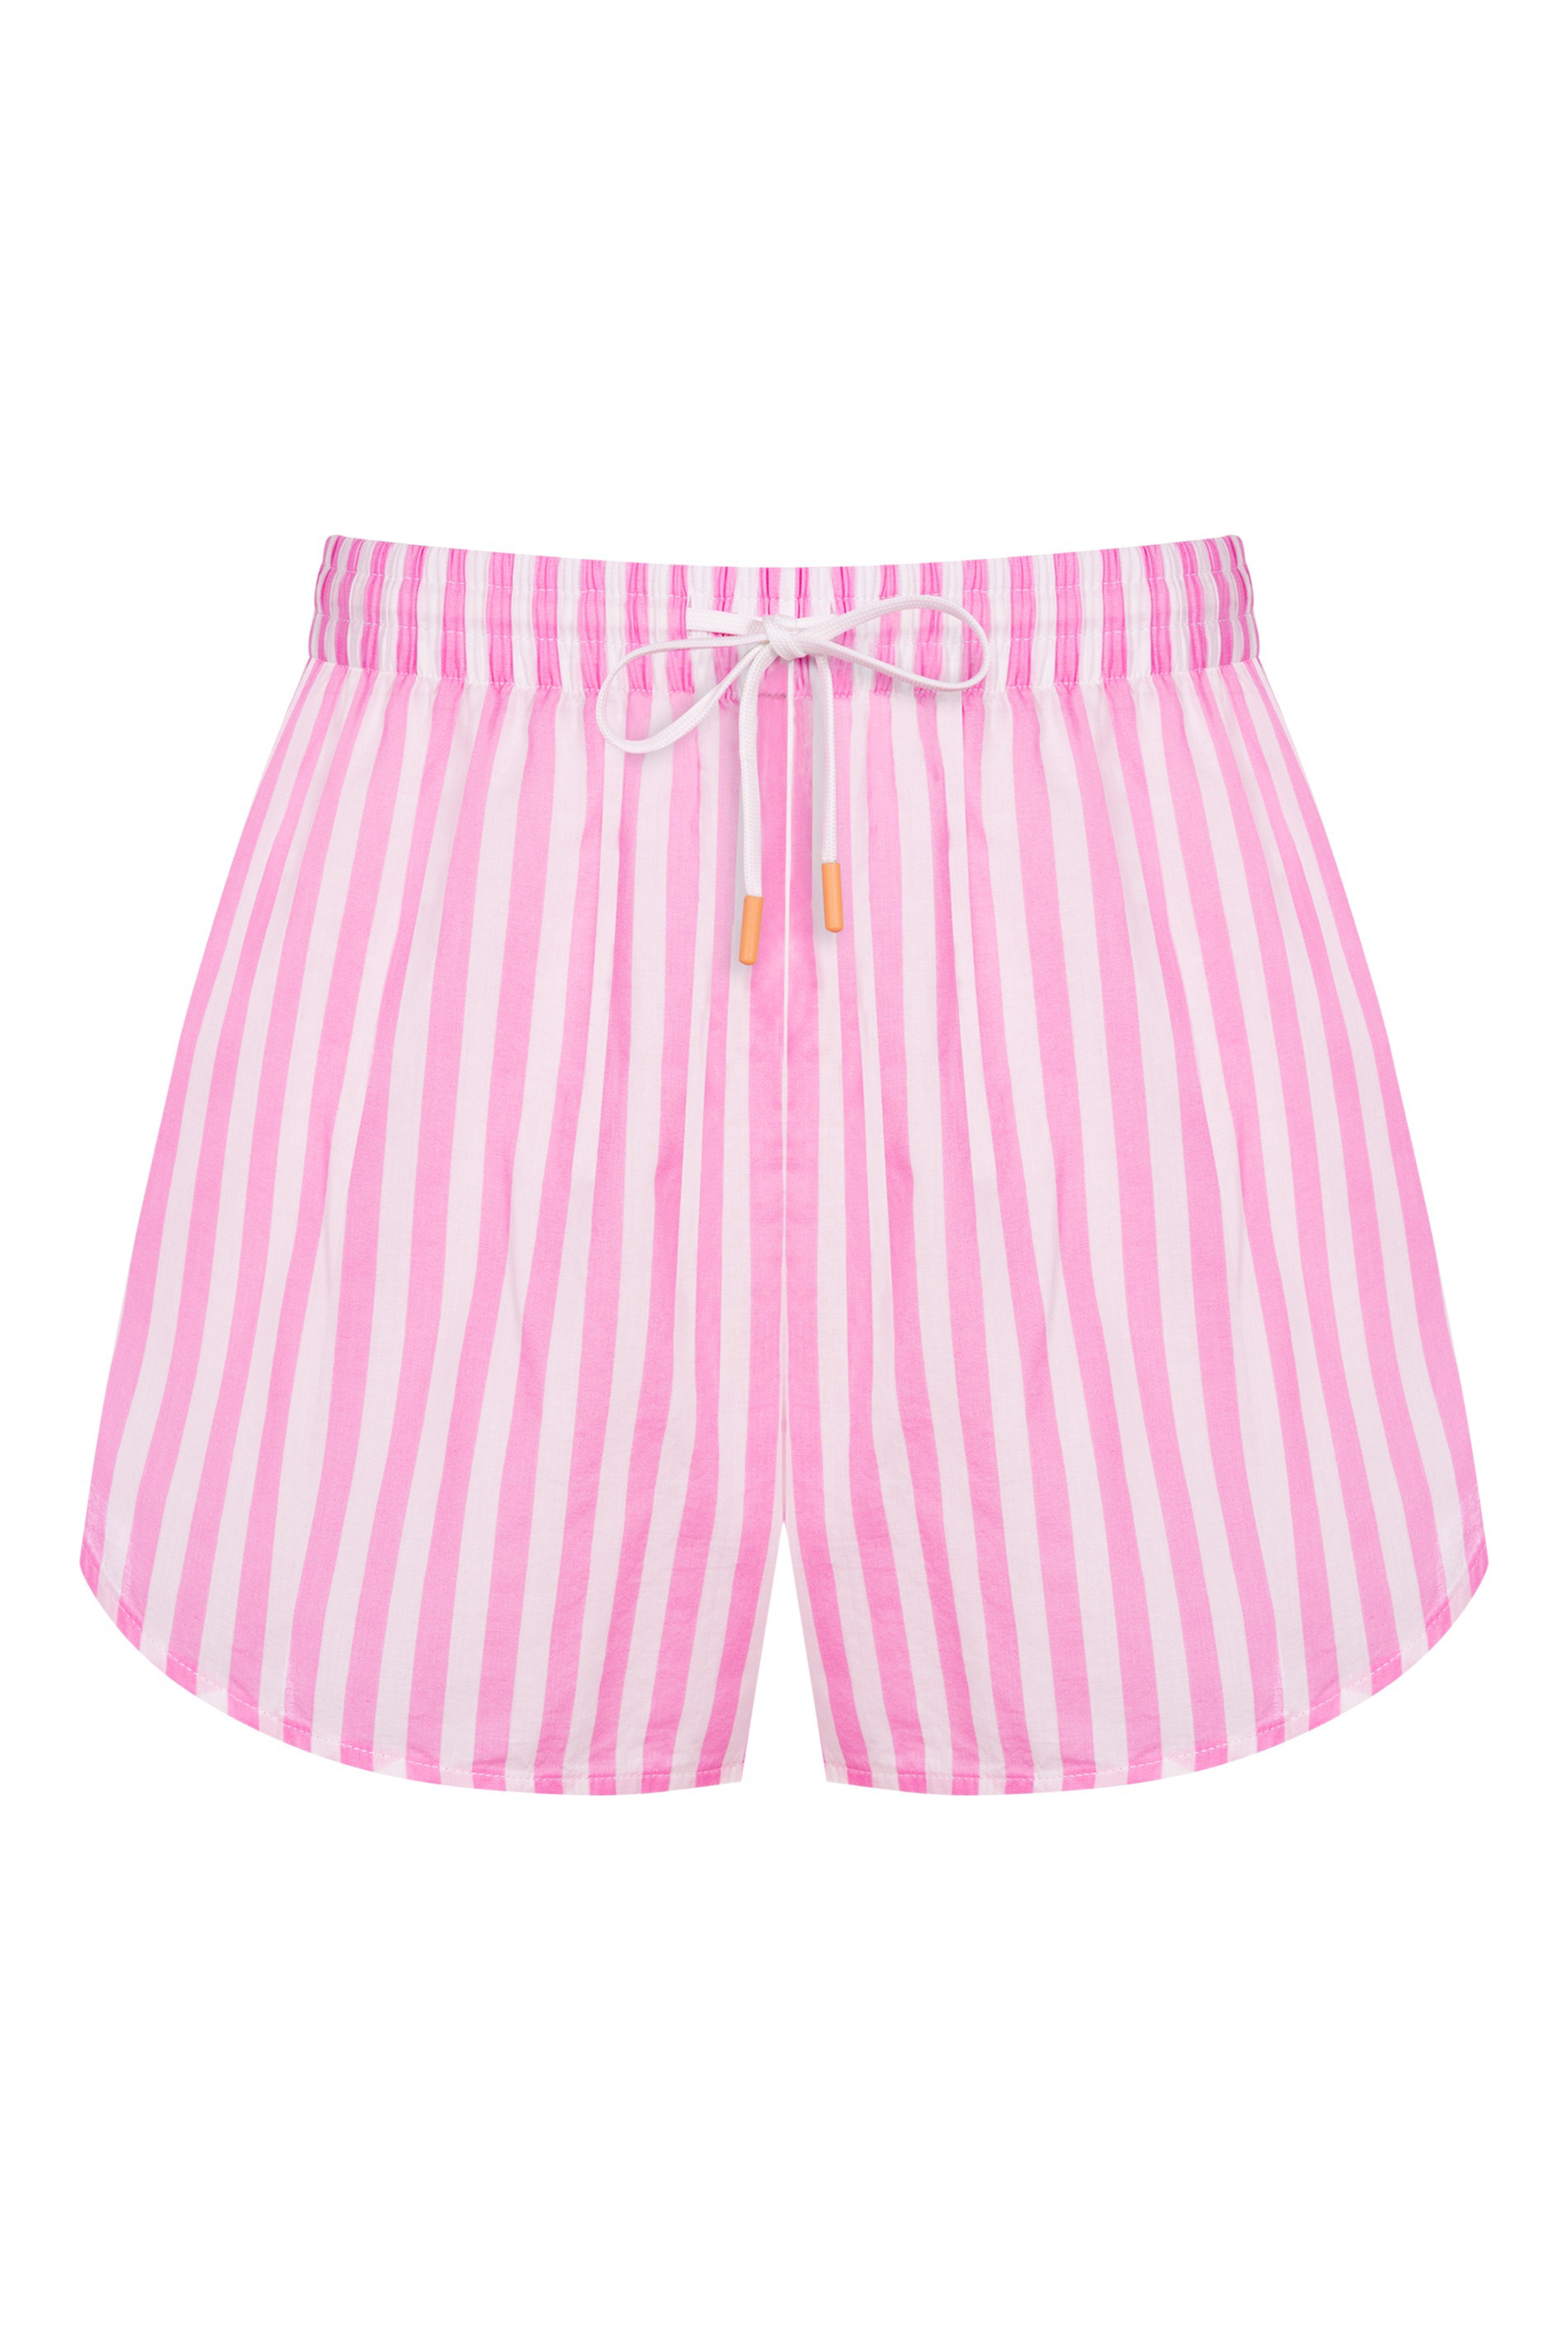 Shorts Serie Ailina Uitknippen | mey®